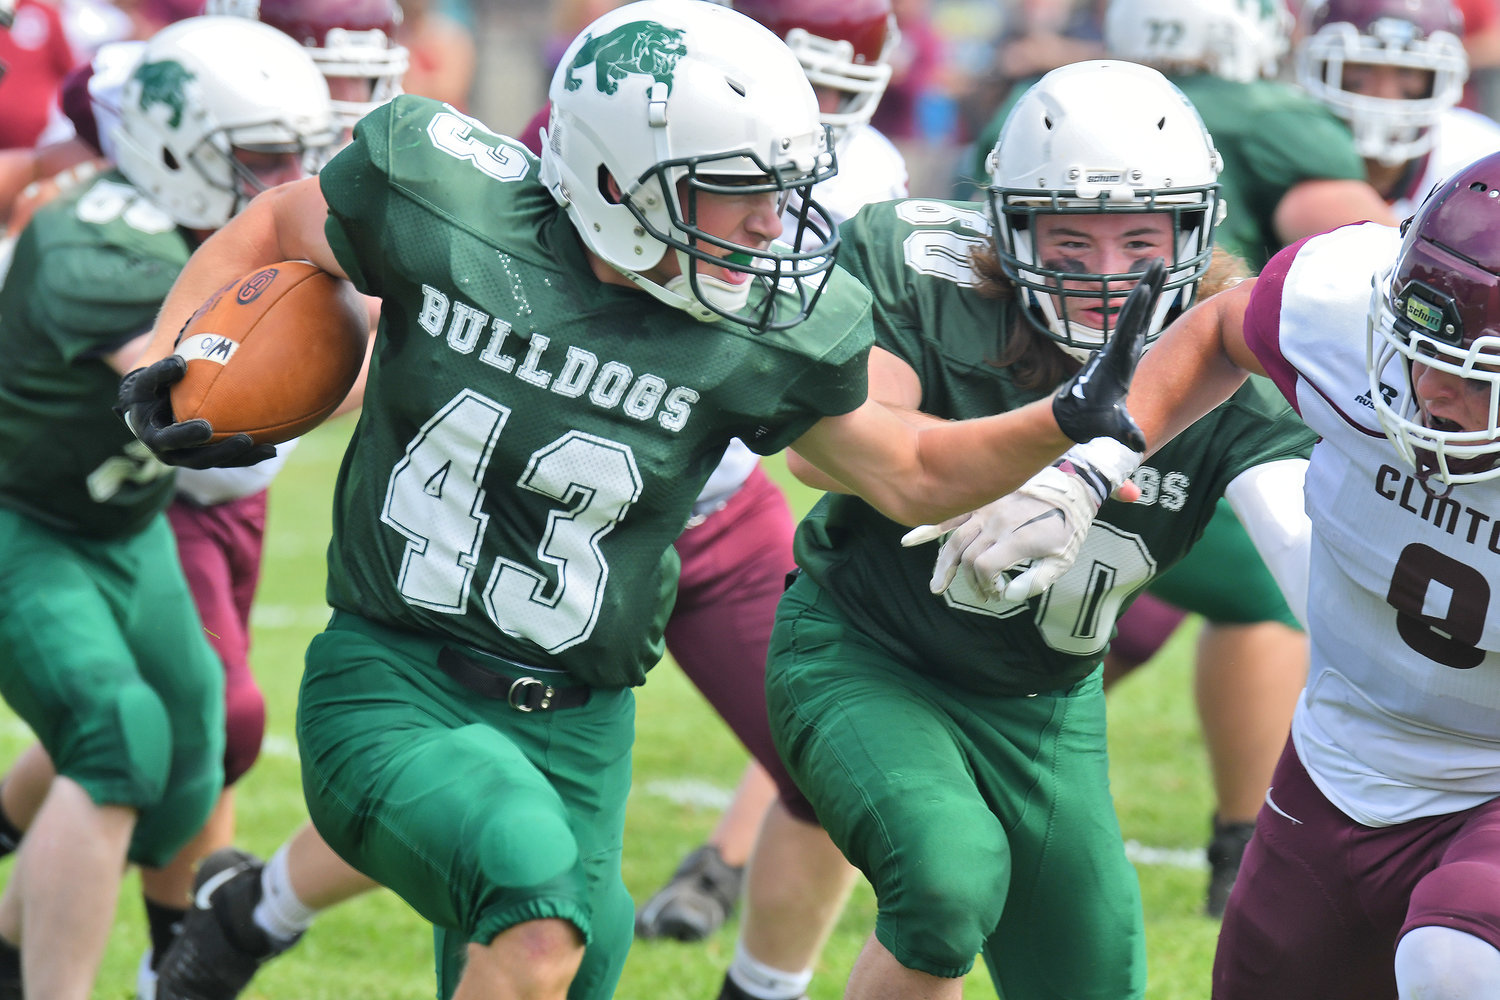 Westmoreland's Jack Williams puts his arm out to fend off Clinton's Caden Hinderling during Saturday afternoon's non-league game in Westmoreland. The Warriors won 28-6.